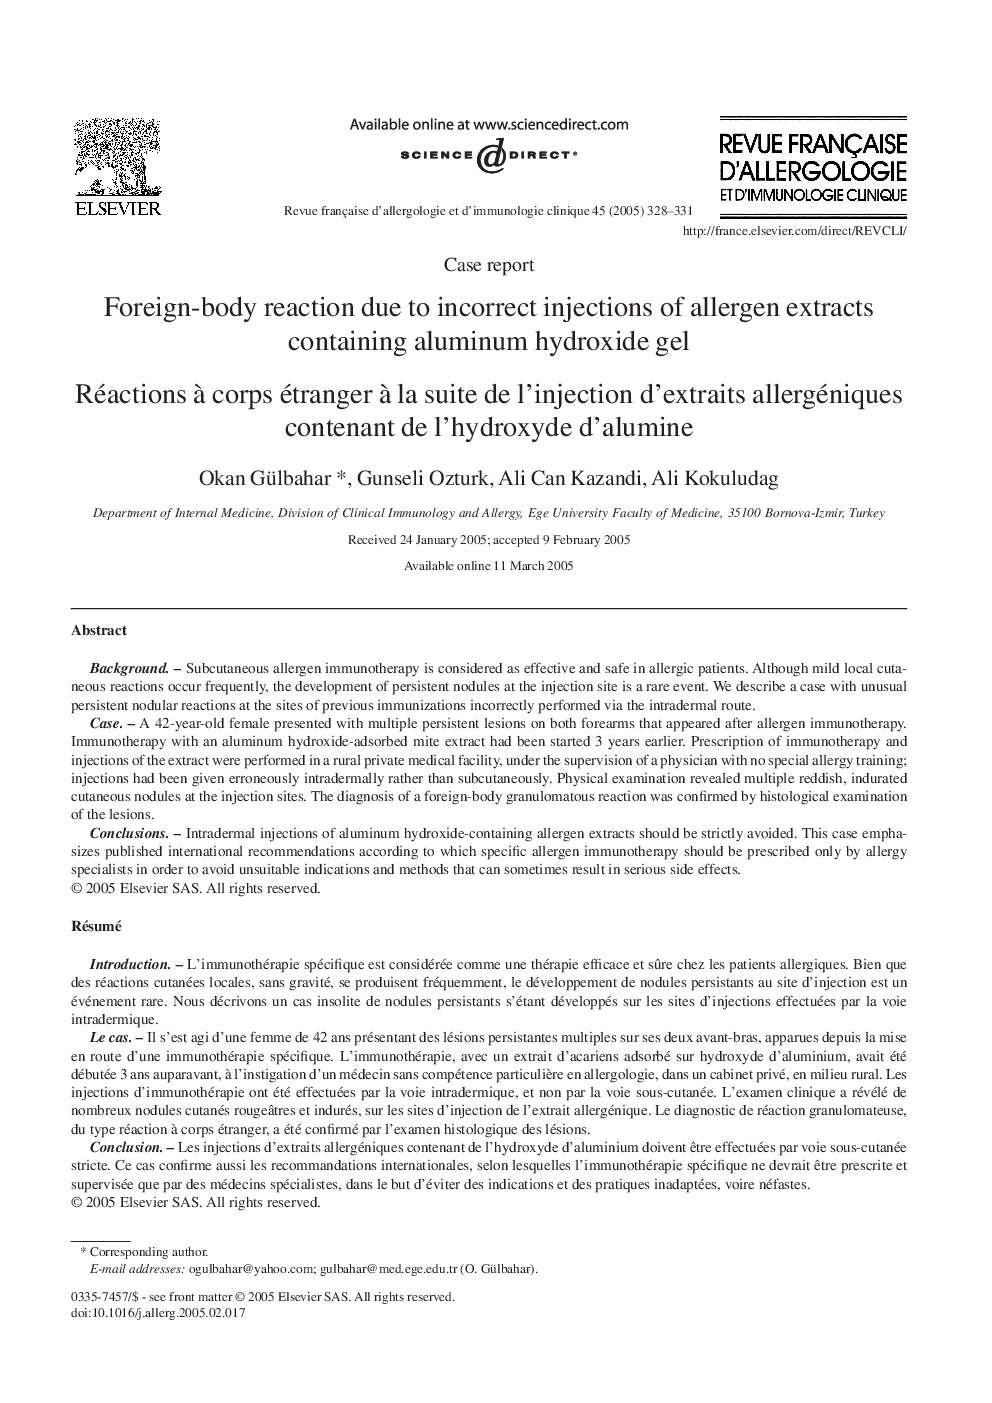 Foreign-body reaction due to incorrect injections of allergen extracts containing aluminum hydroxide gel